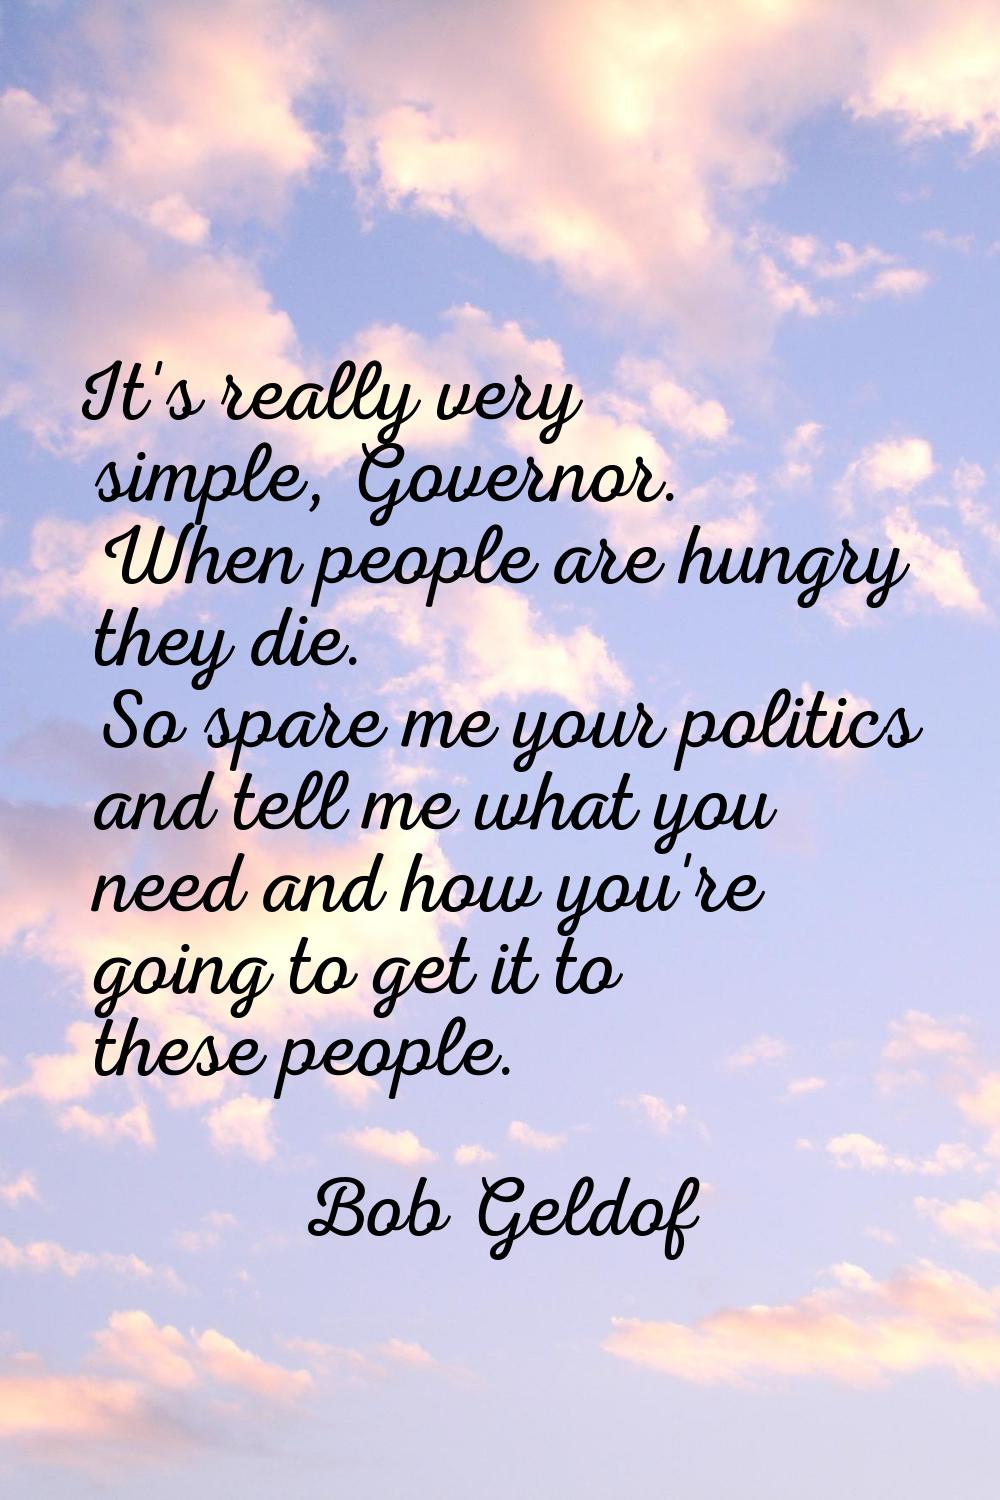 It's really very simple, Governor. When people are hungry they die. So spare me your politics and t